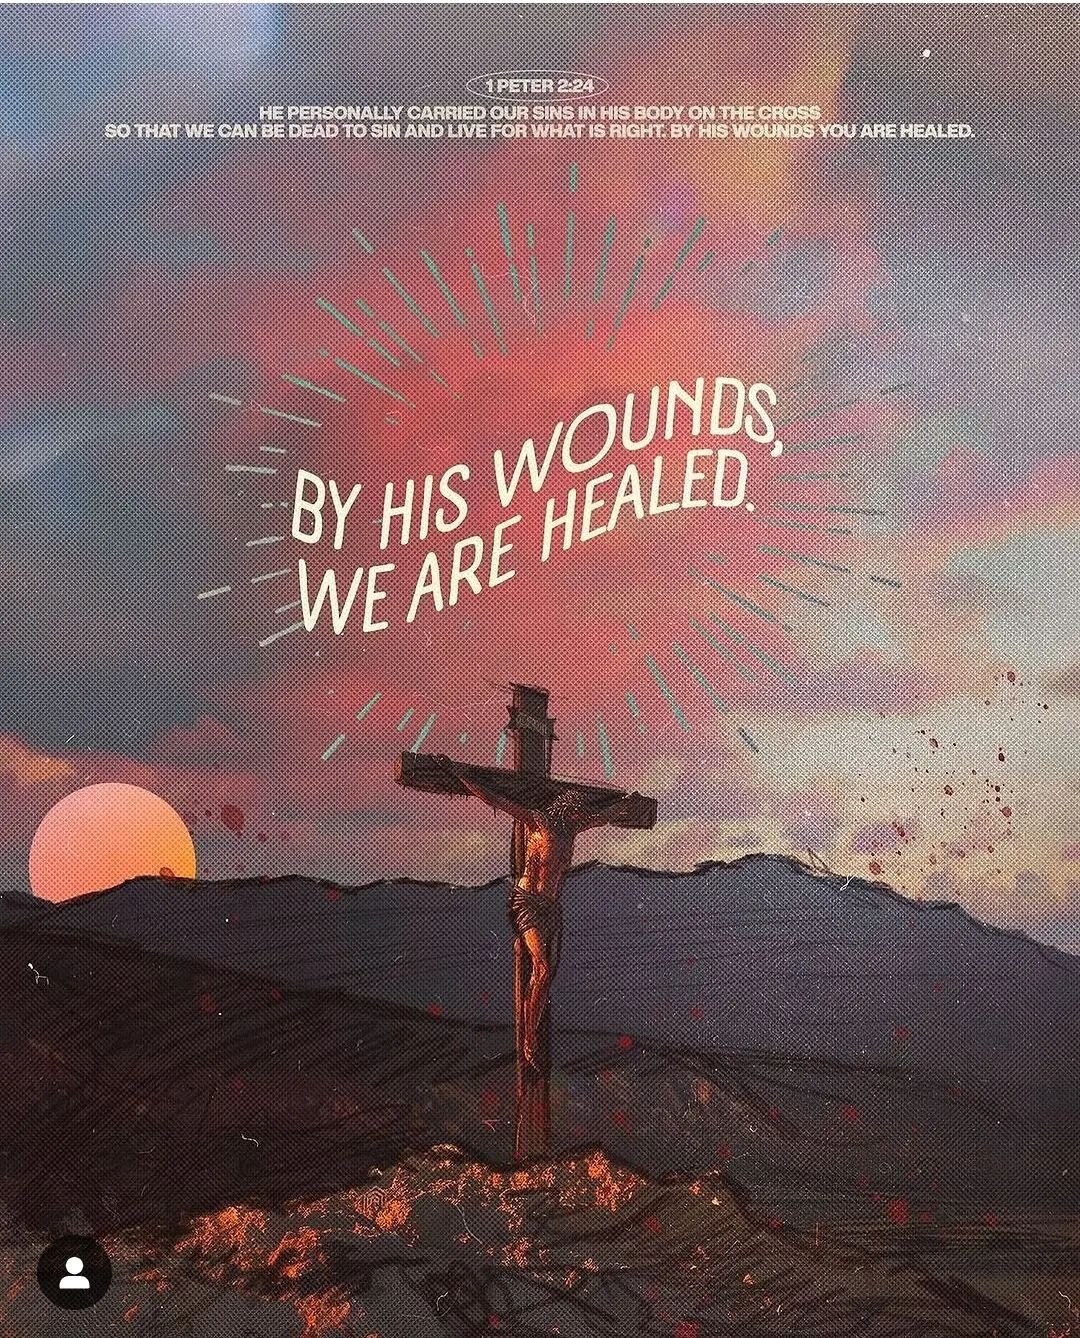 ‭Matthew 28:6 NIV‬
[6] He is not here; he has risen, just as he said. Come and see the place where he lay. 

https://bible.com/bible/111/mat.28.6.NIV